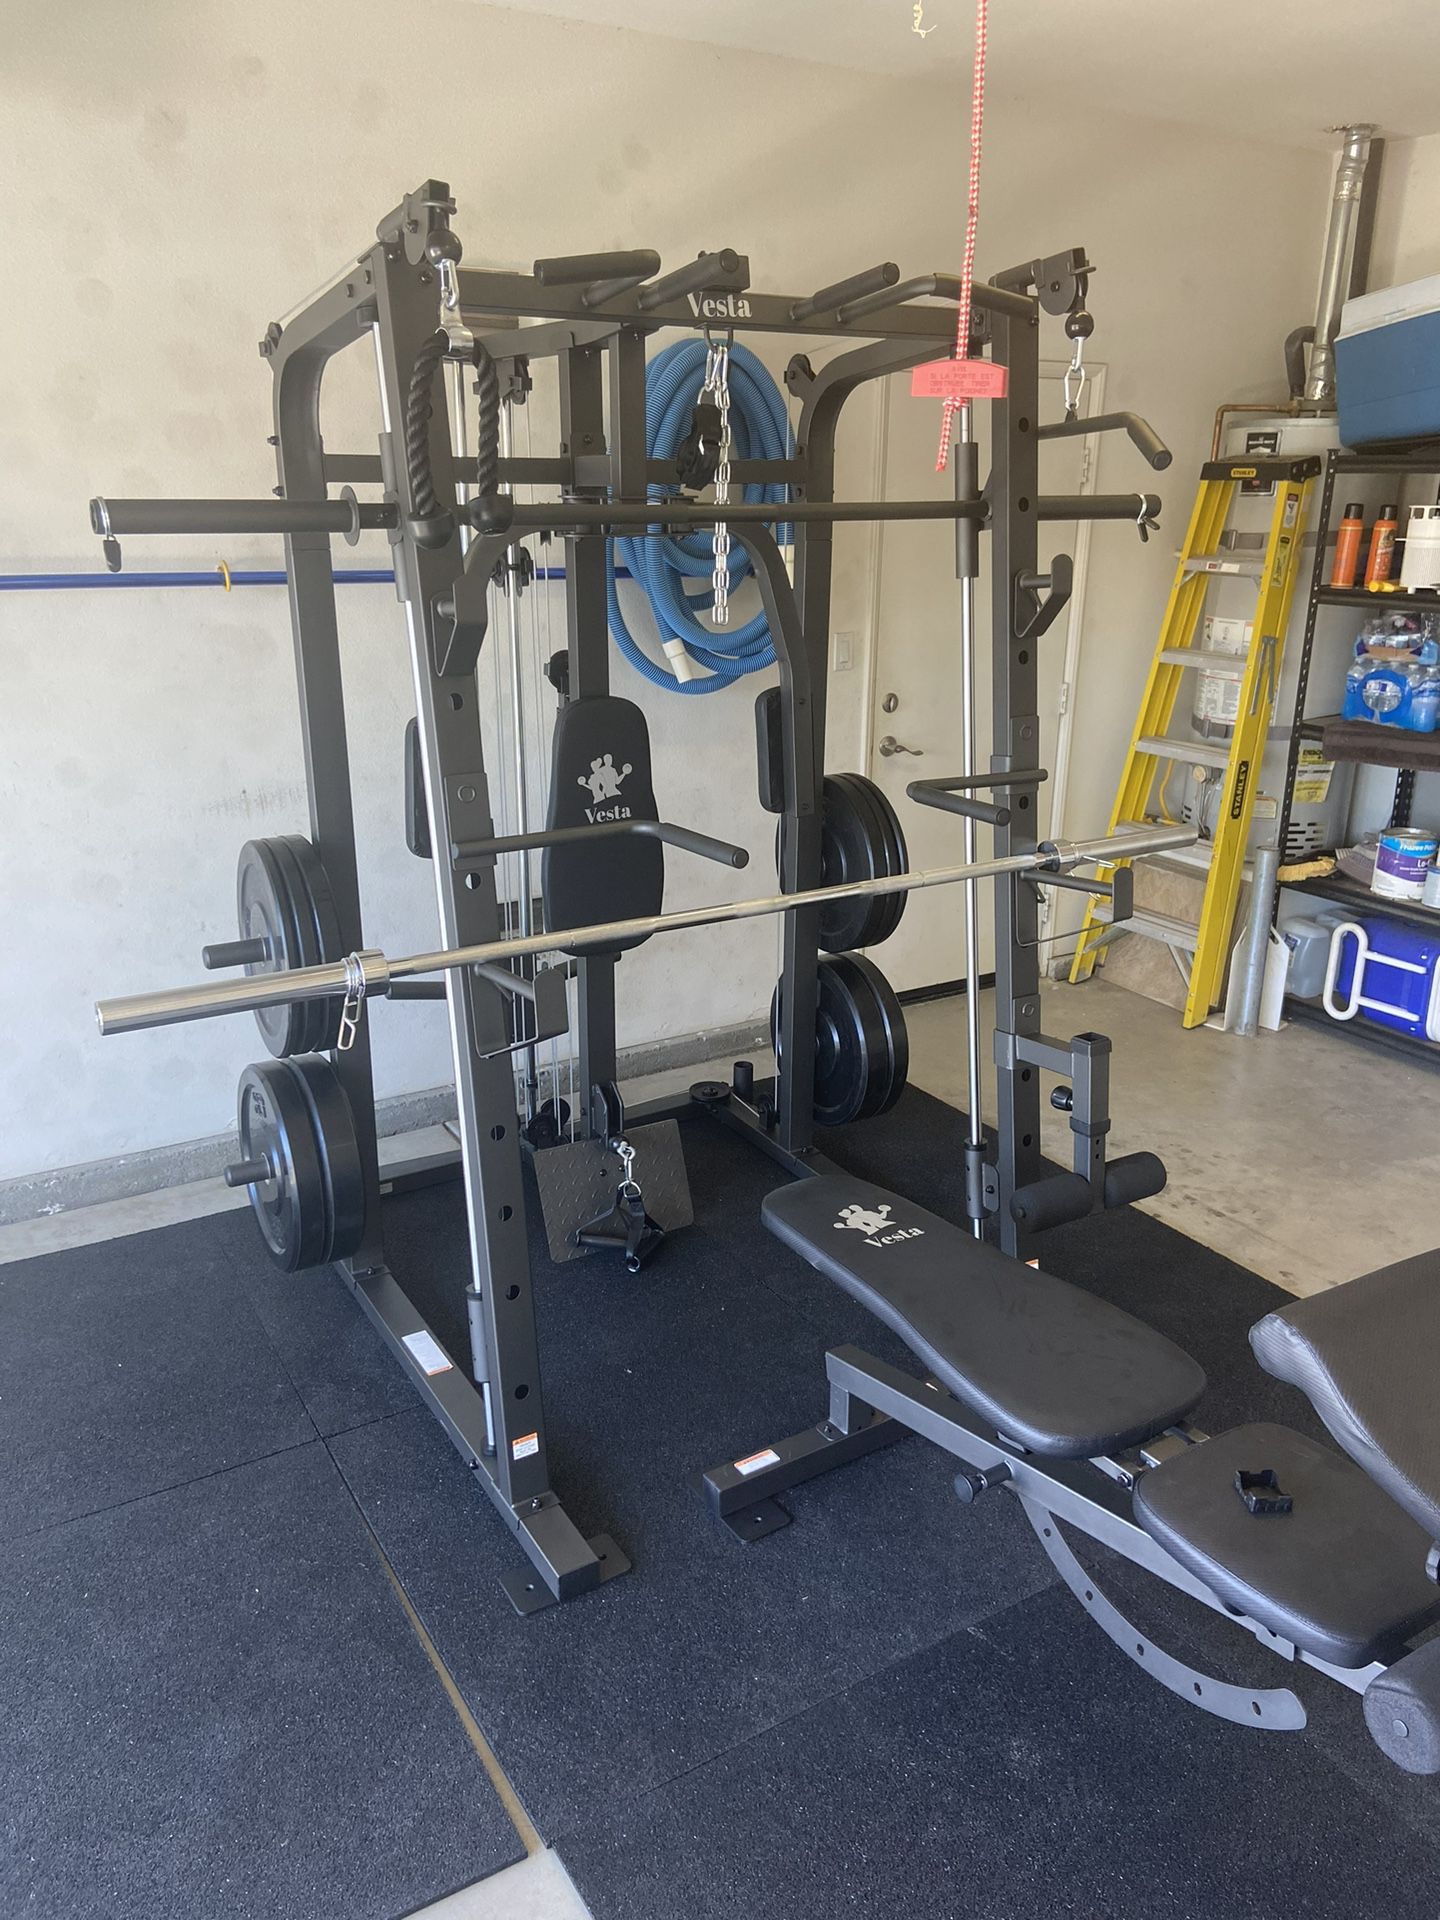 SMITH MACHINE/ PULLEY SYSTEM/ SQUAT RACK/ ADJUSTABLE BENCH/ BARBELL/ OLYMPIC BUMPER PLATES/ GYM EQUIPMENT/ FREE DELIVERY 🚚 